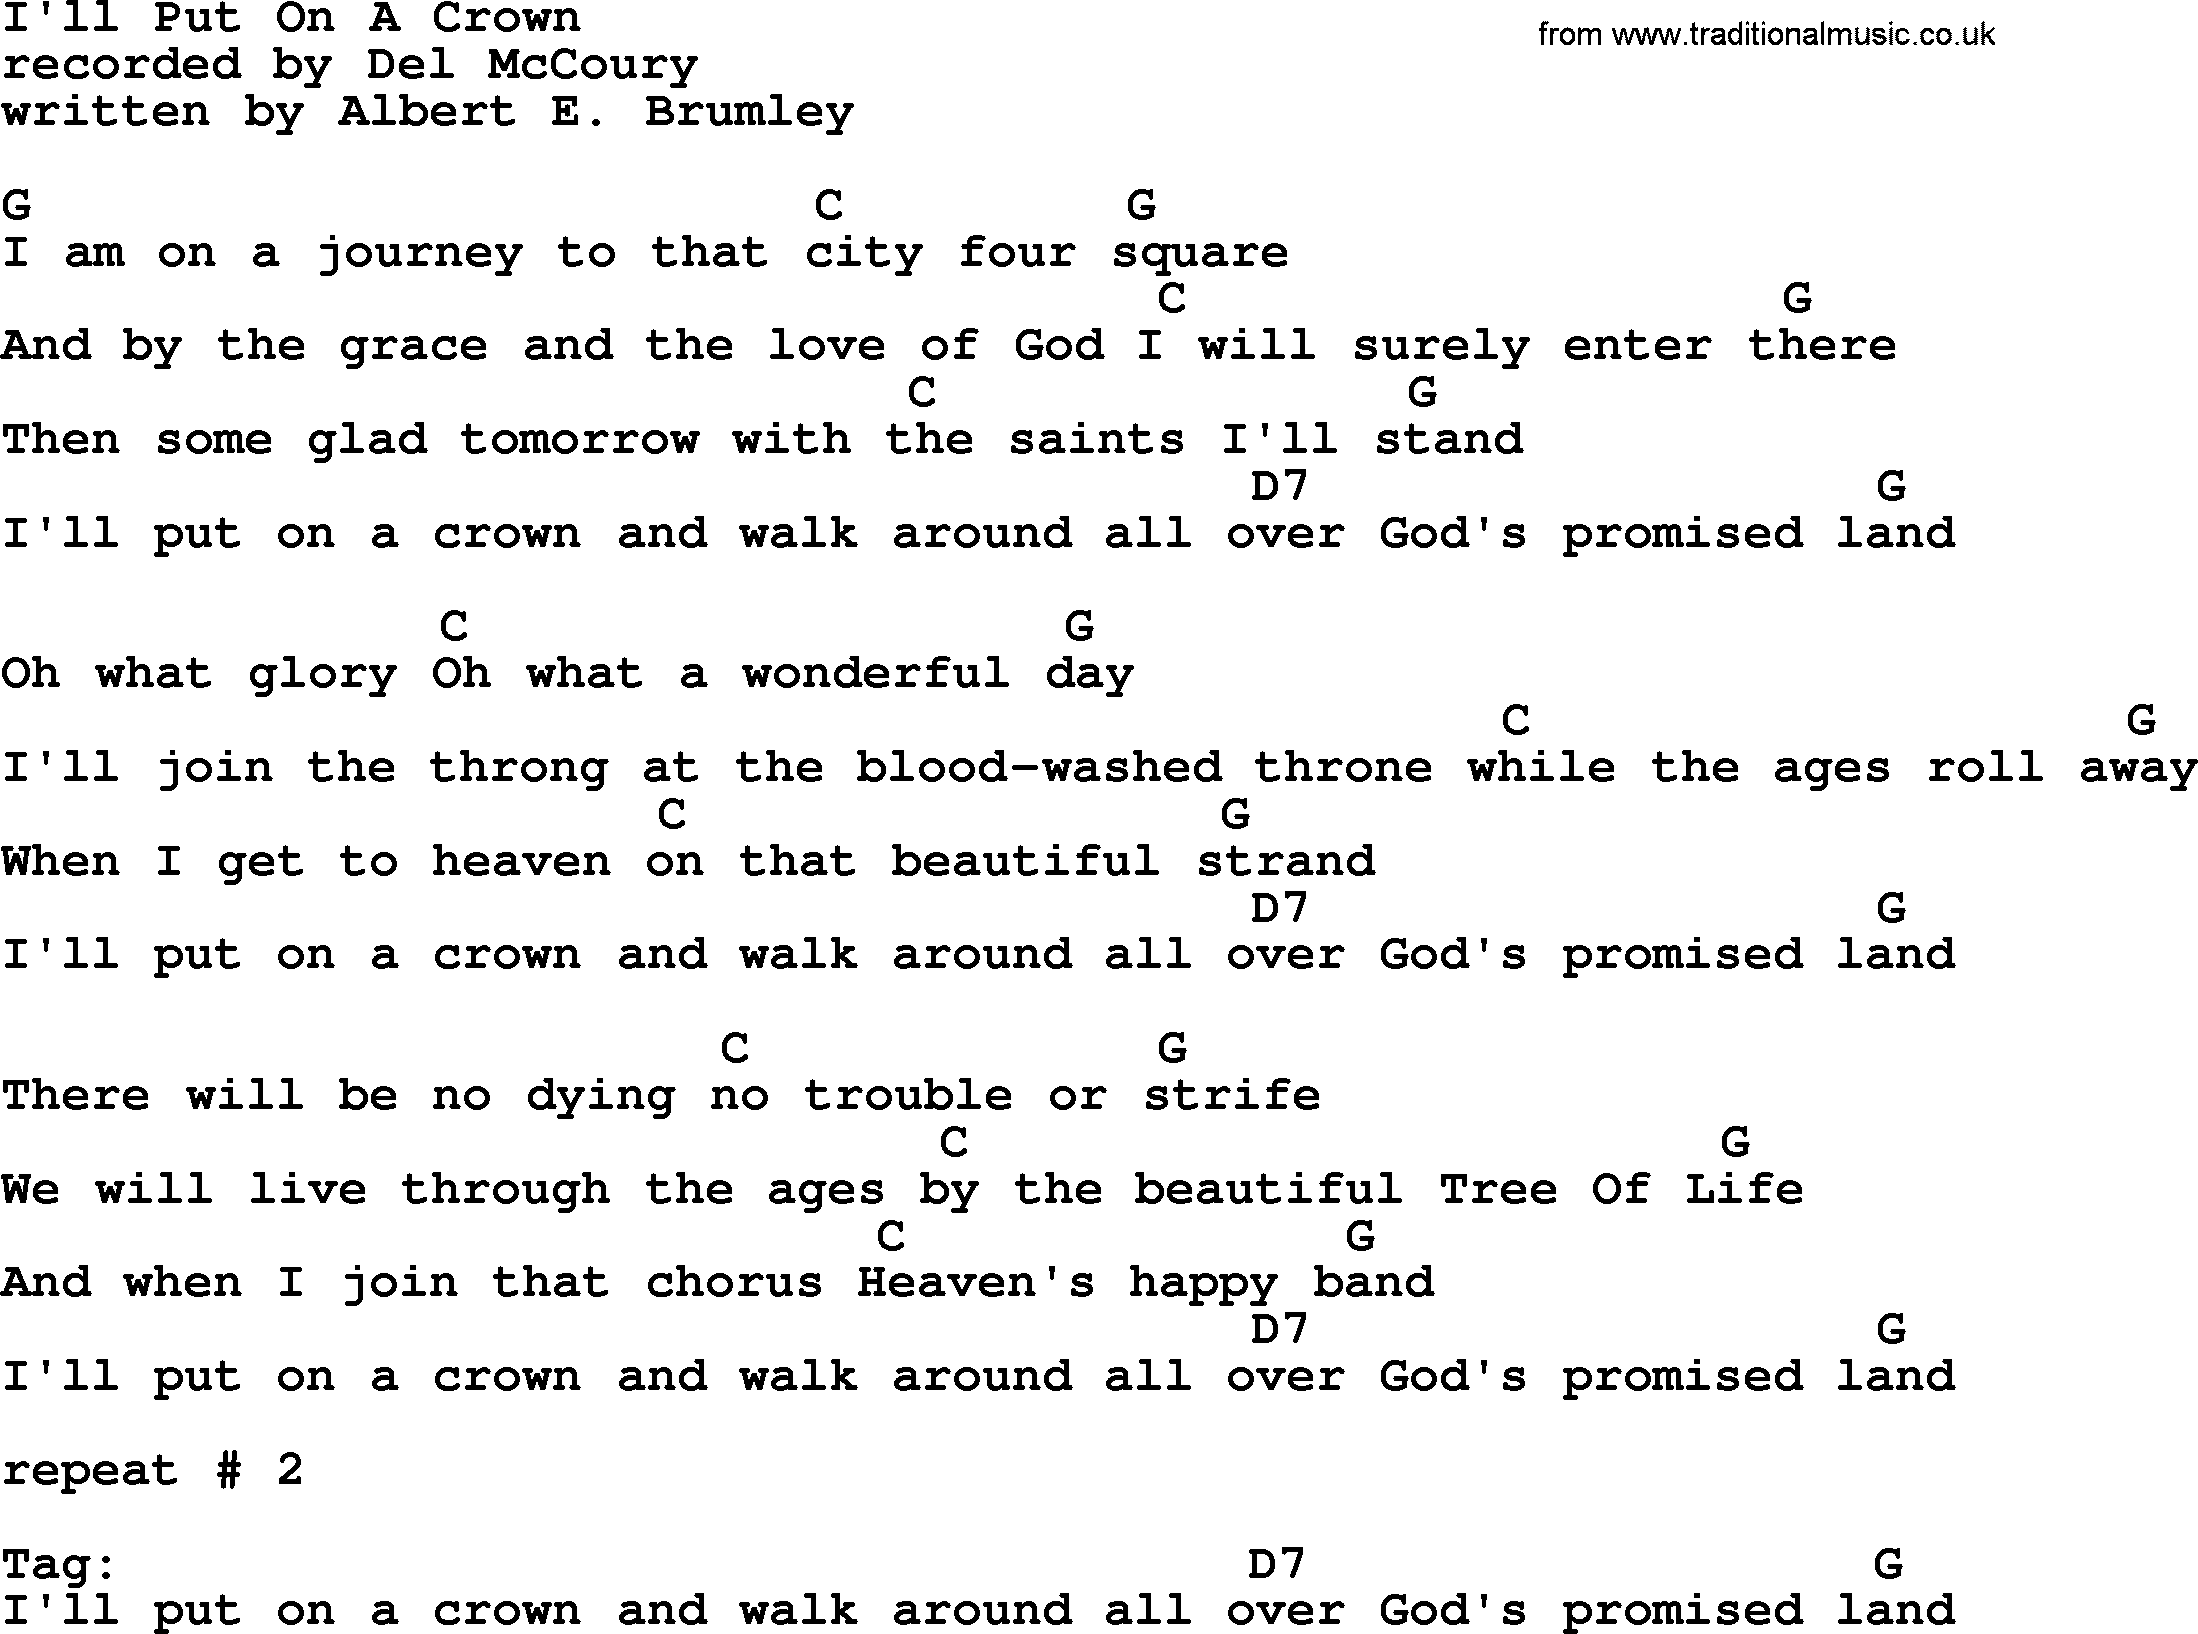 Bluegrass song: I'll Put On A Crown, lyrics and chords